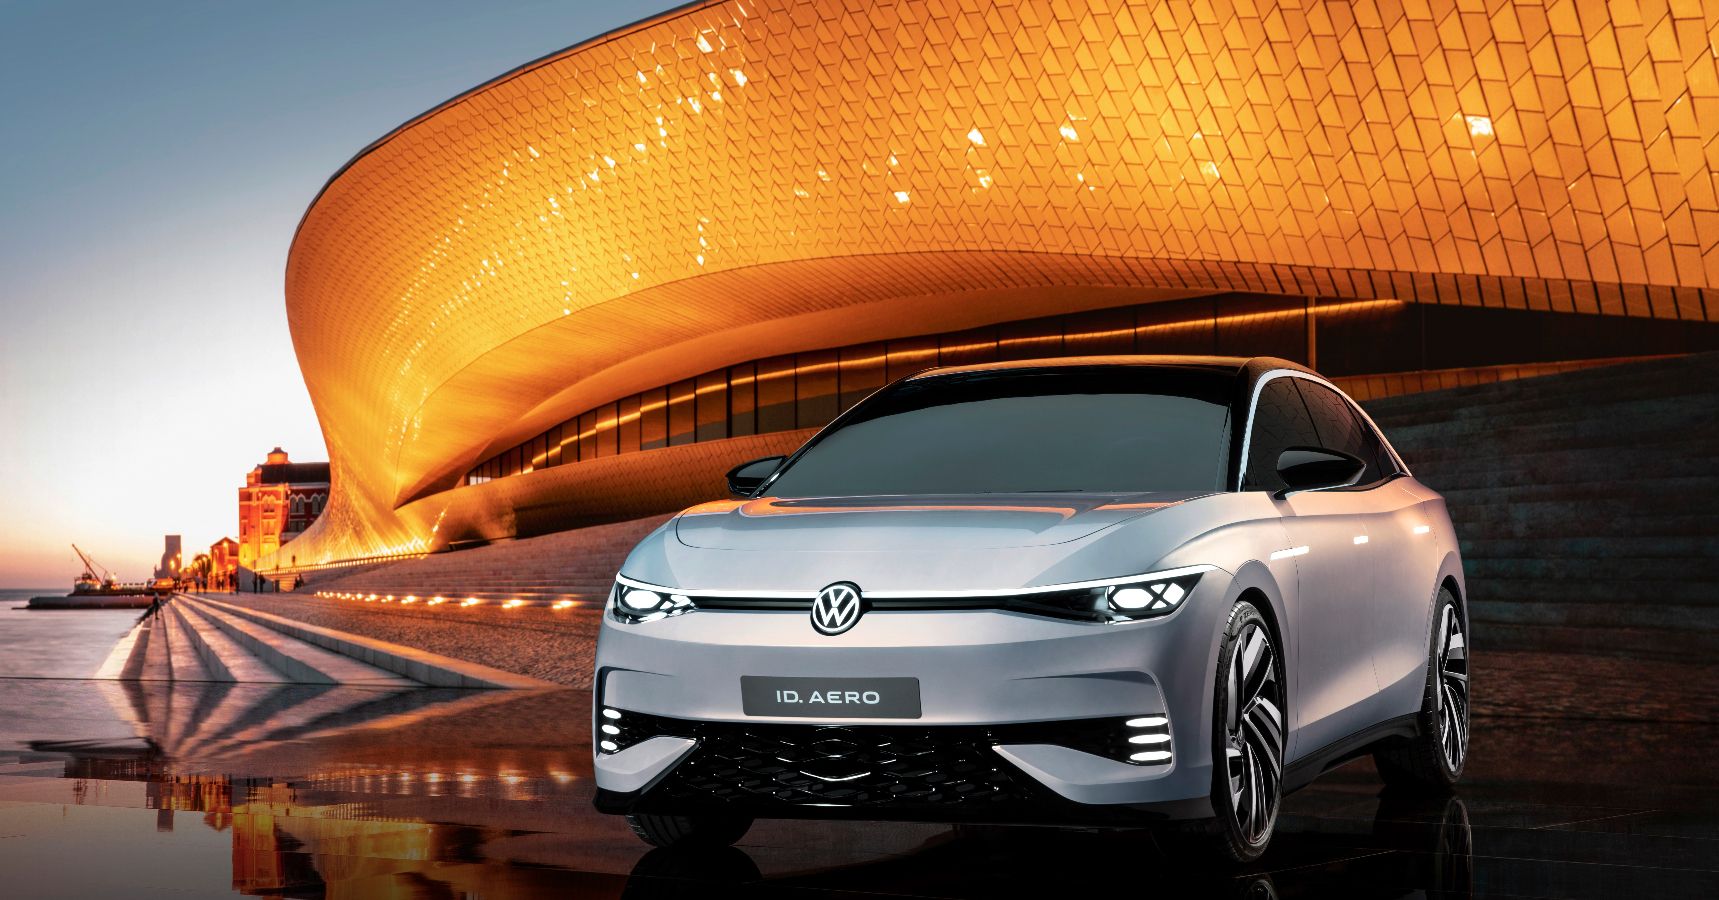 Volkswagen Id Aero Electric Sedan Is A Sign Of Good Things To Come